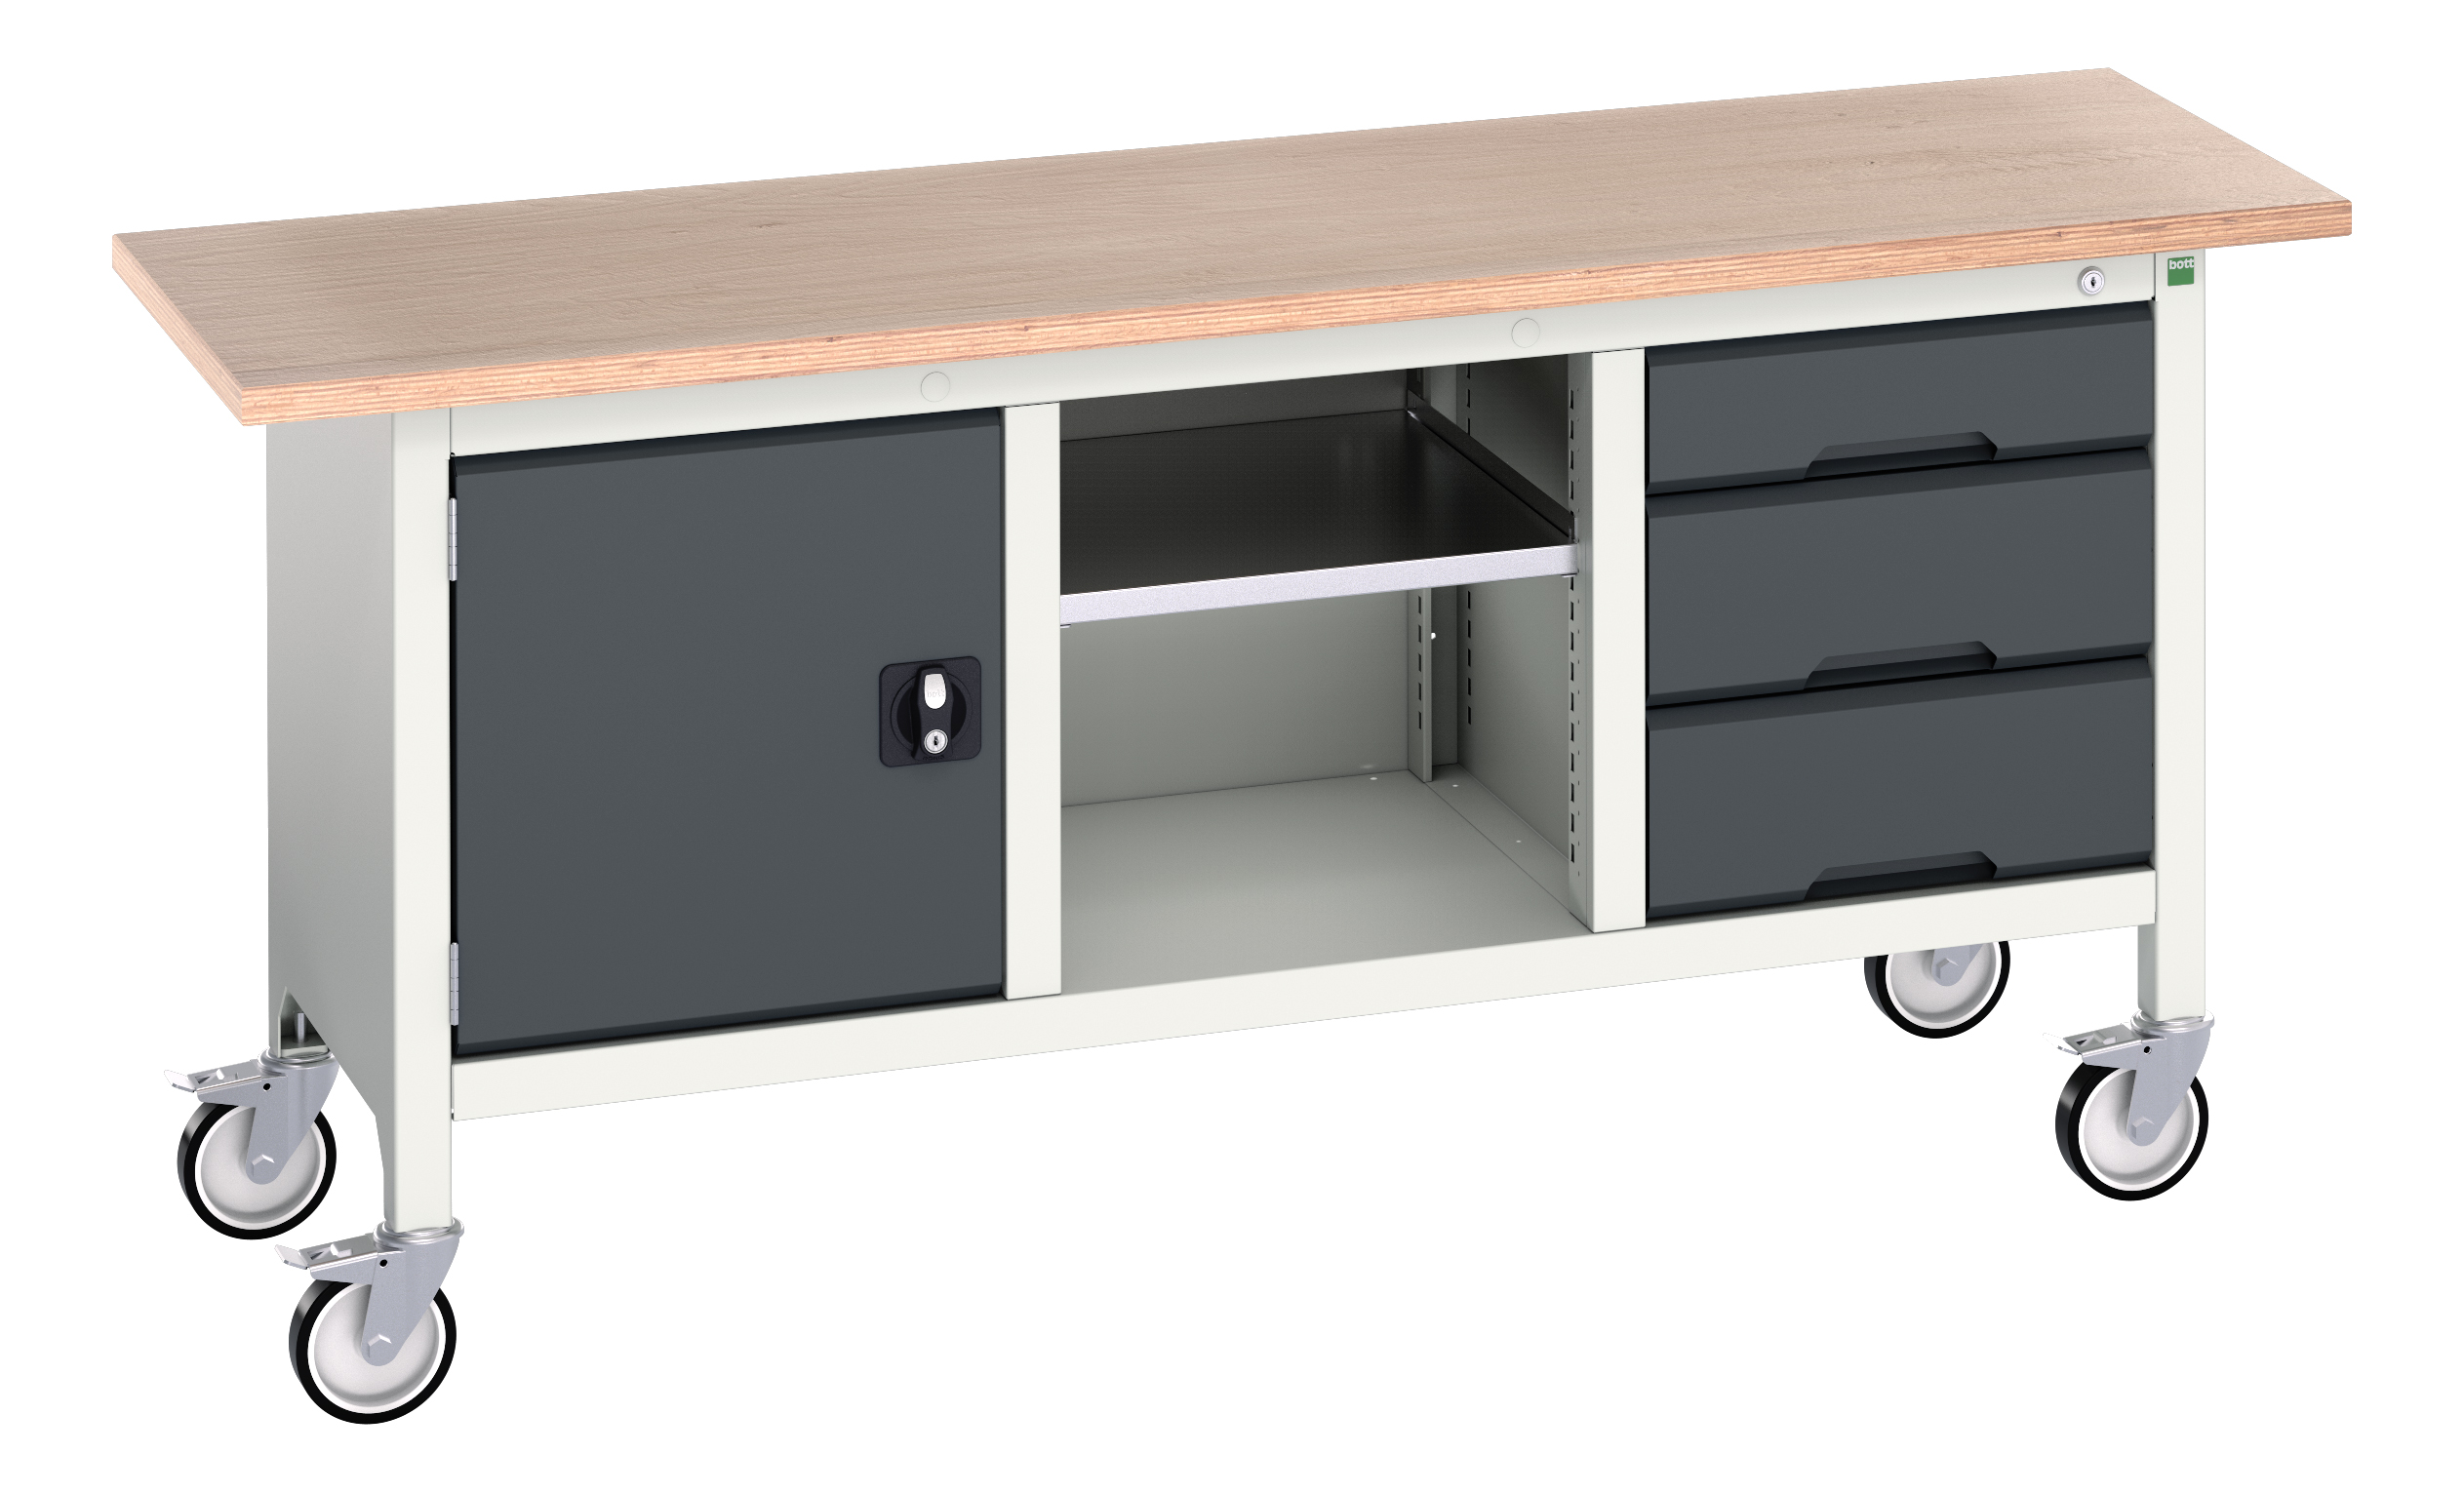 Bott Verso Mobile Storage Bench With Full Cupboard / Open Cupboard / 3 Drawer Cab - 16923220.19